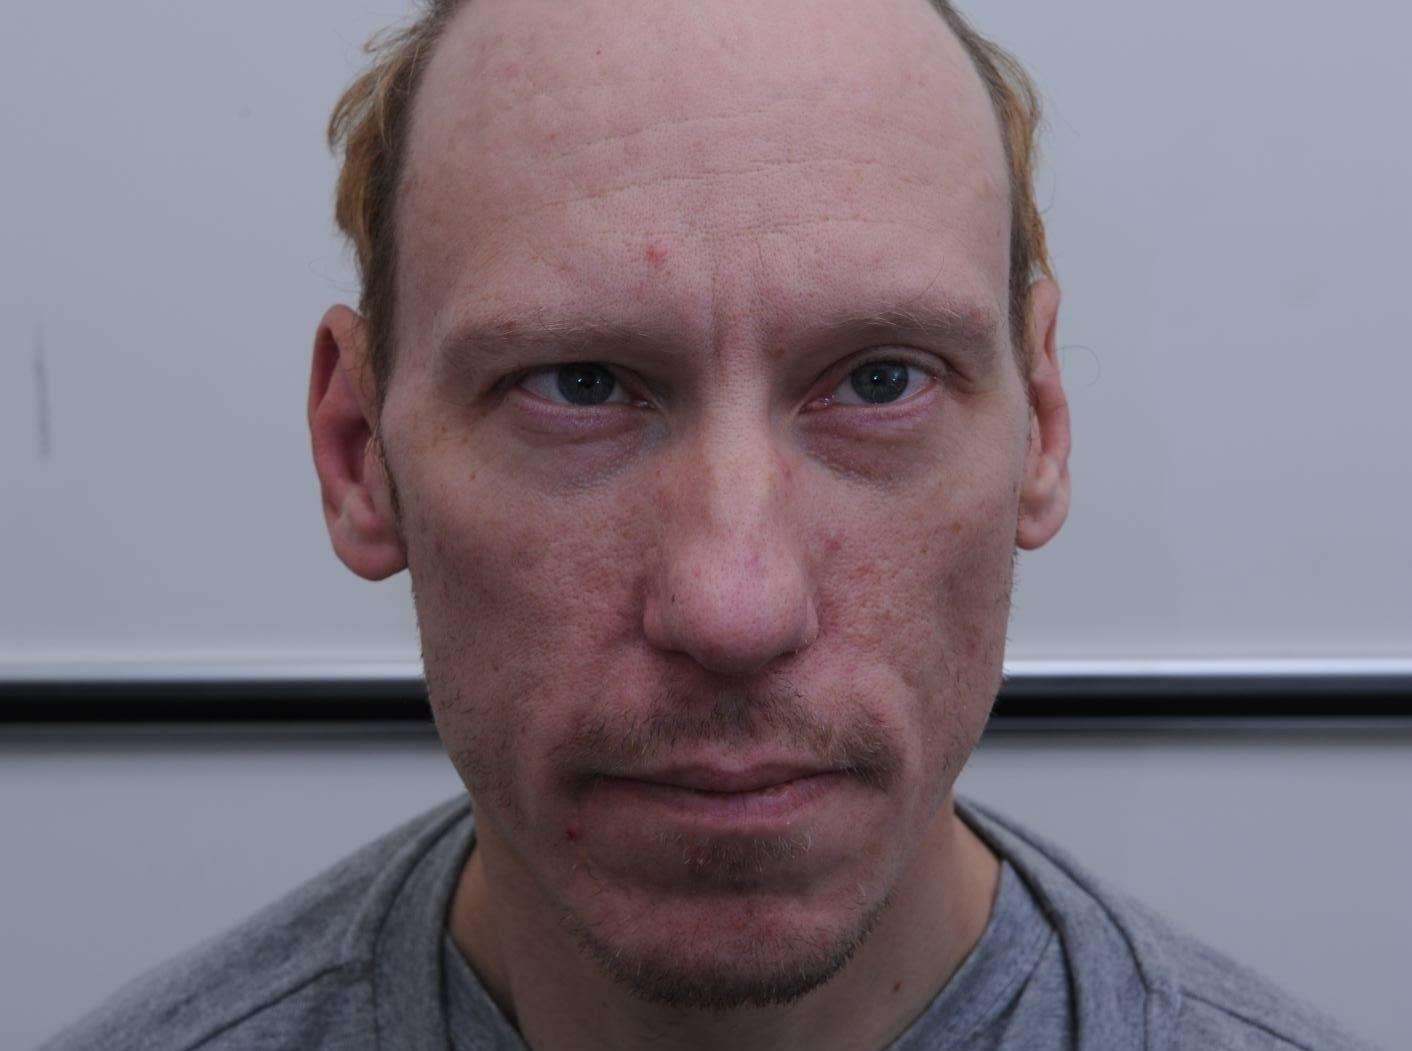 Stephen Port, who murdered four people and raped even more, picture Met Police press bureau